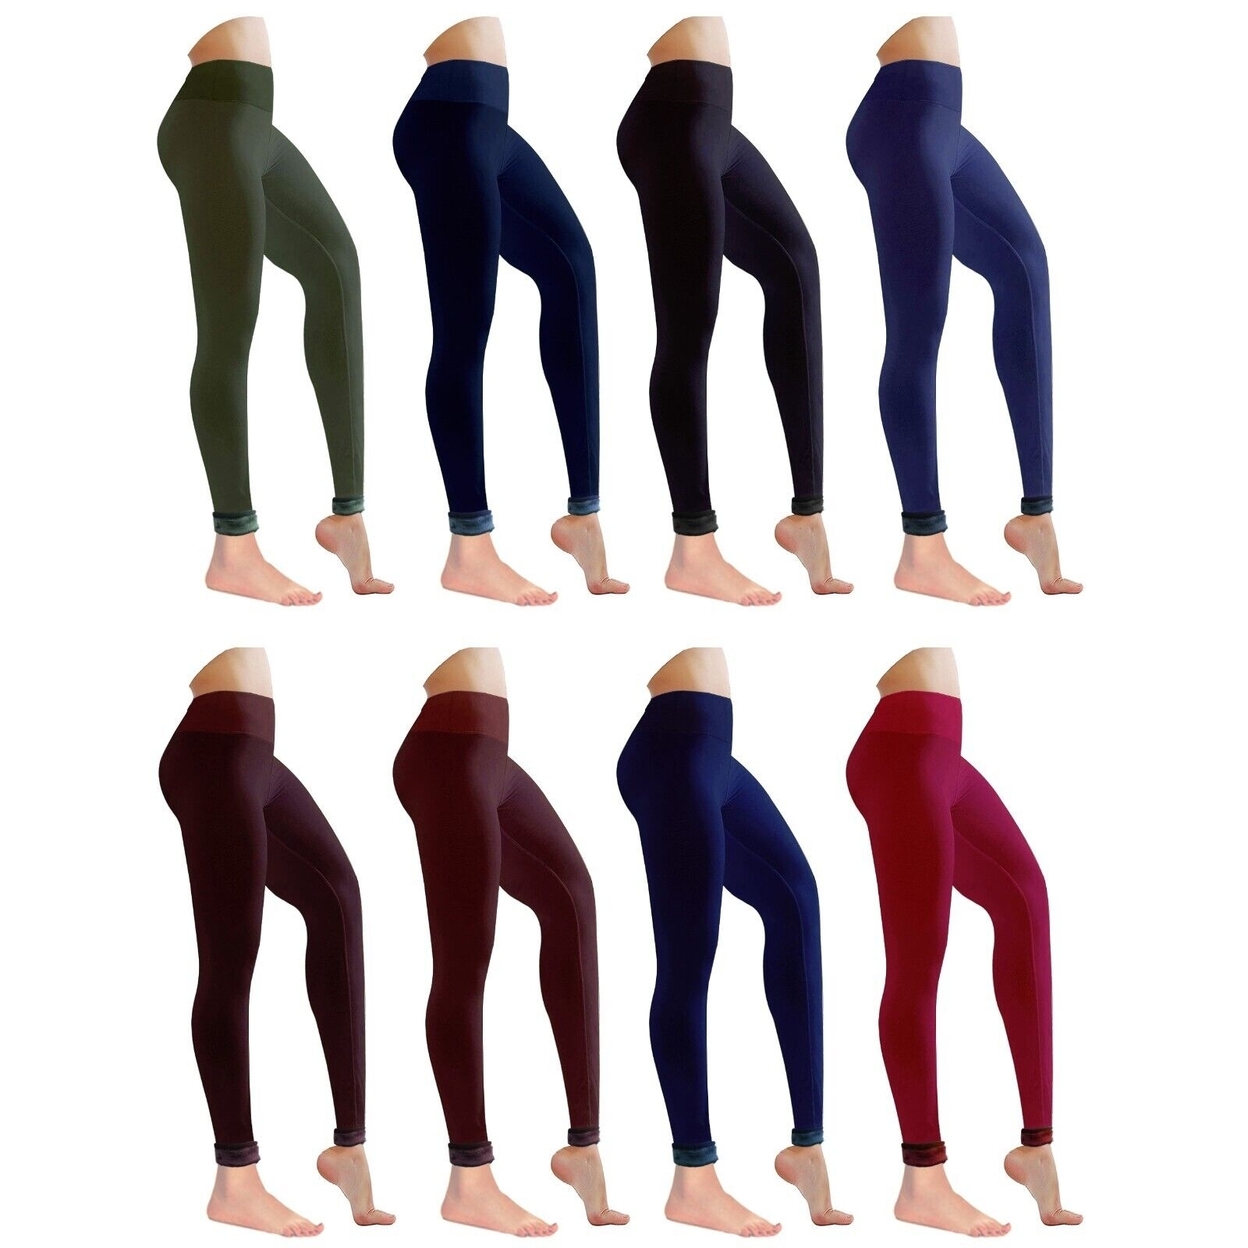 4-Pack: Women's Winter Warm Ultra Soft Cozy Fur Lined Leggings - Assorted, Large